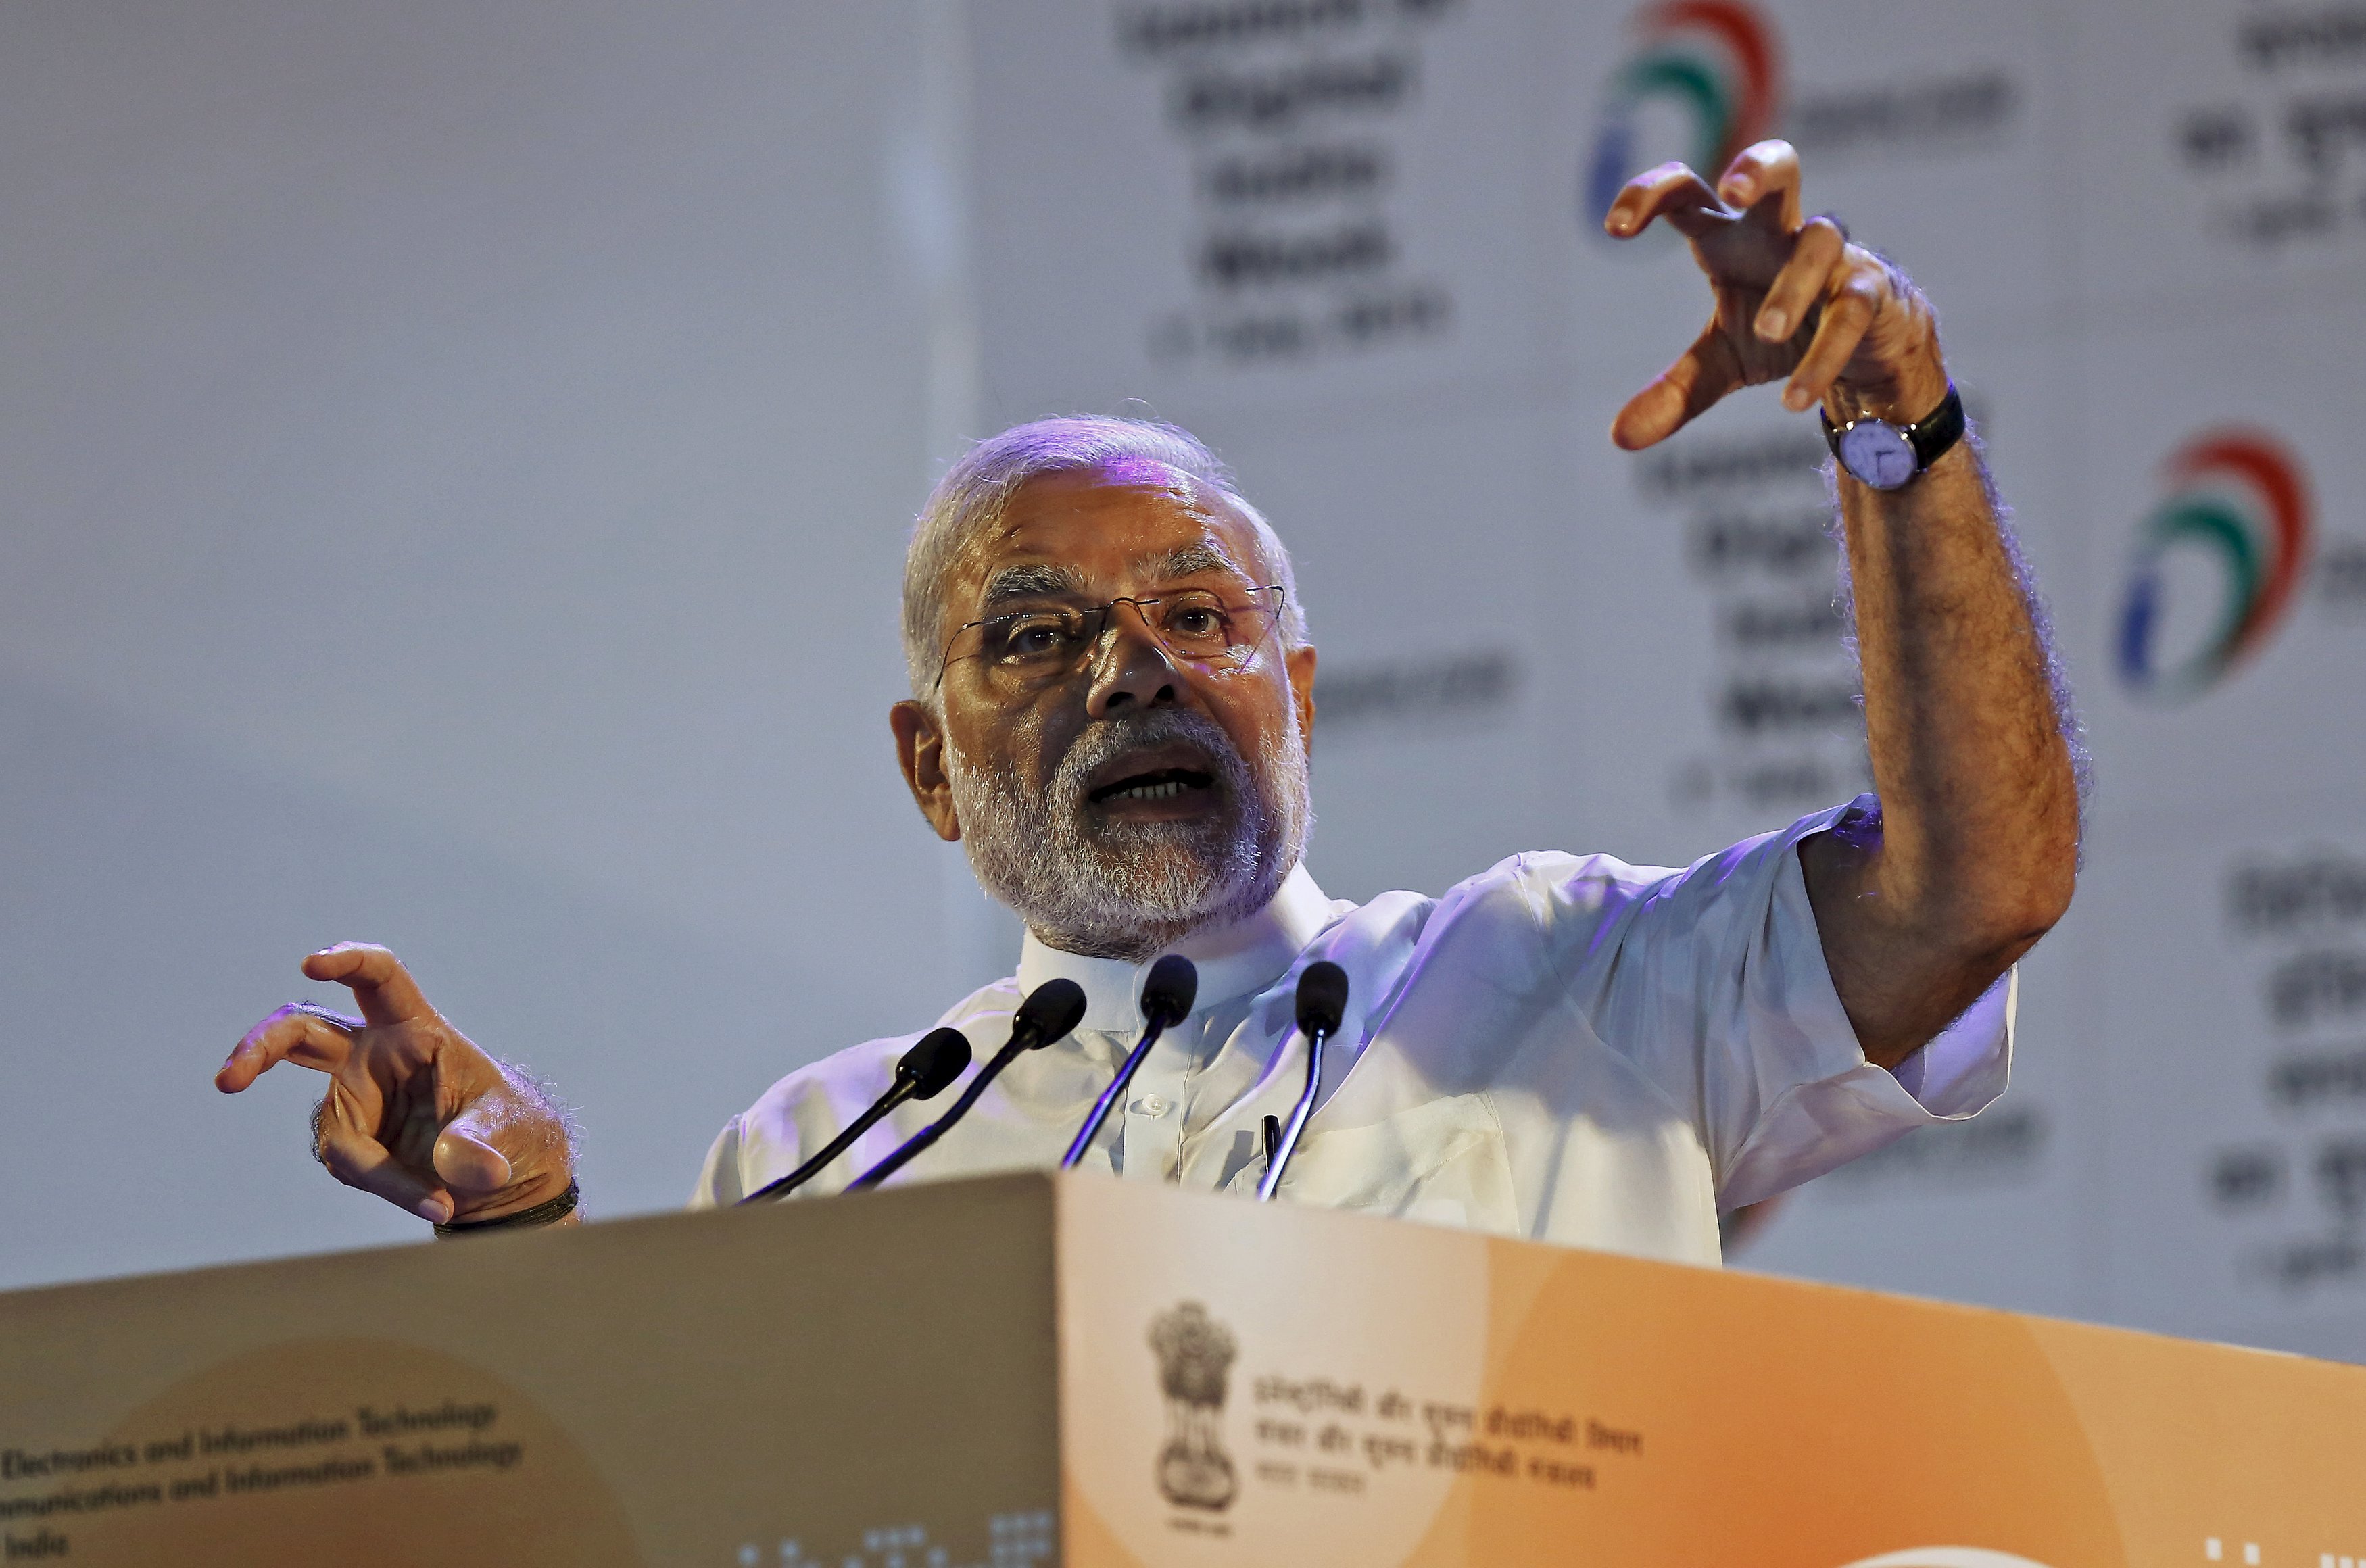 Indian Prime Minister Narendra Modi gestures while addressing the gathering during the launch of "Digital India Week" in New Delhi, India, July 1, 2015. Modi urged more companies to make electronic and digital goods on Wednesday, reviving his campaign promise to bridge India's digital divide backed by over $70 billion in investment pledges. REUTERS/Adnan Abidi